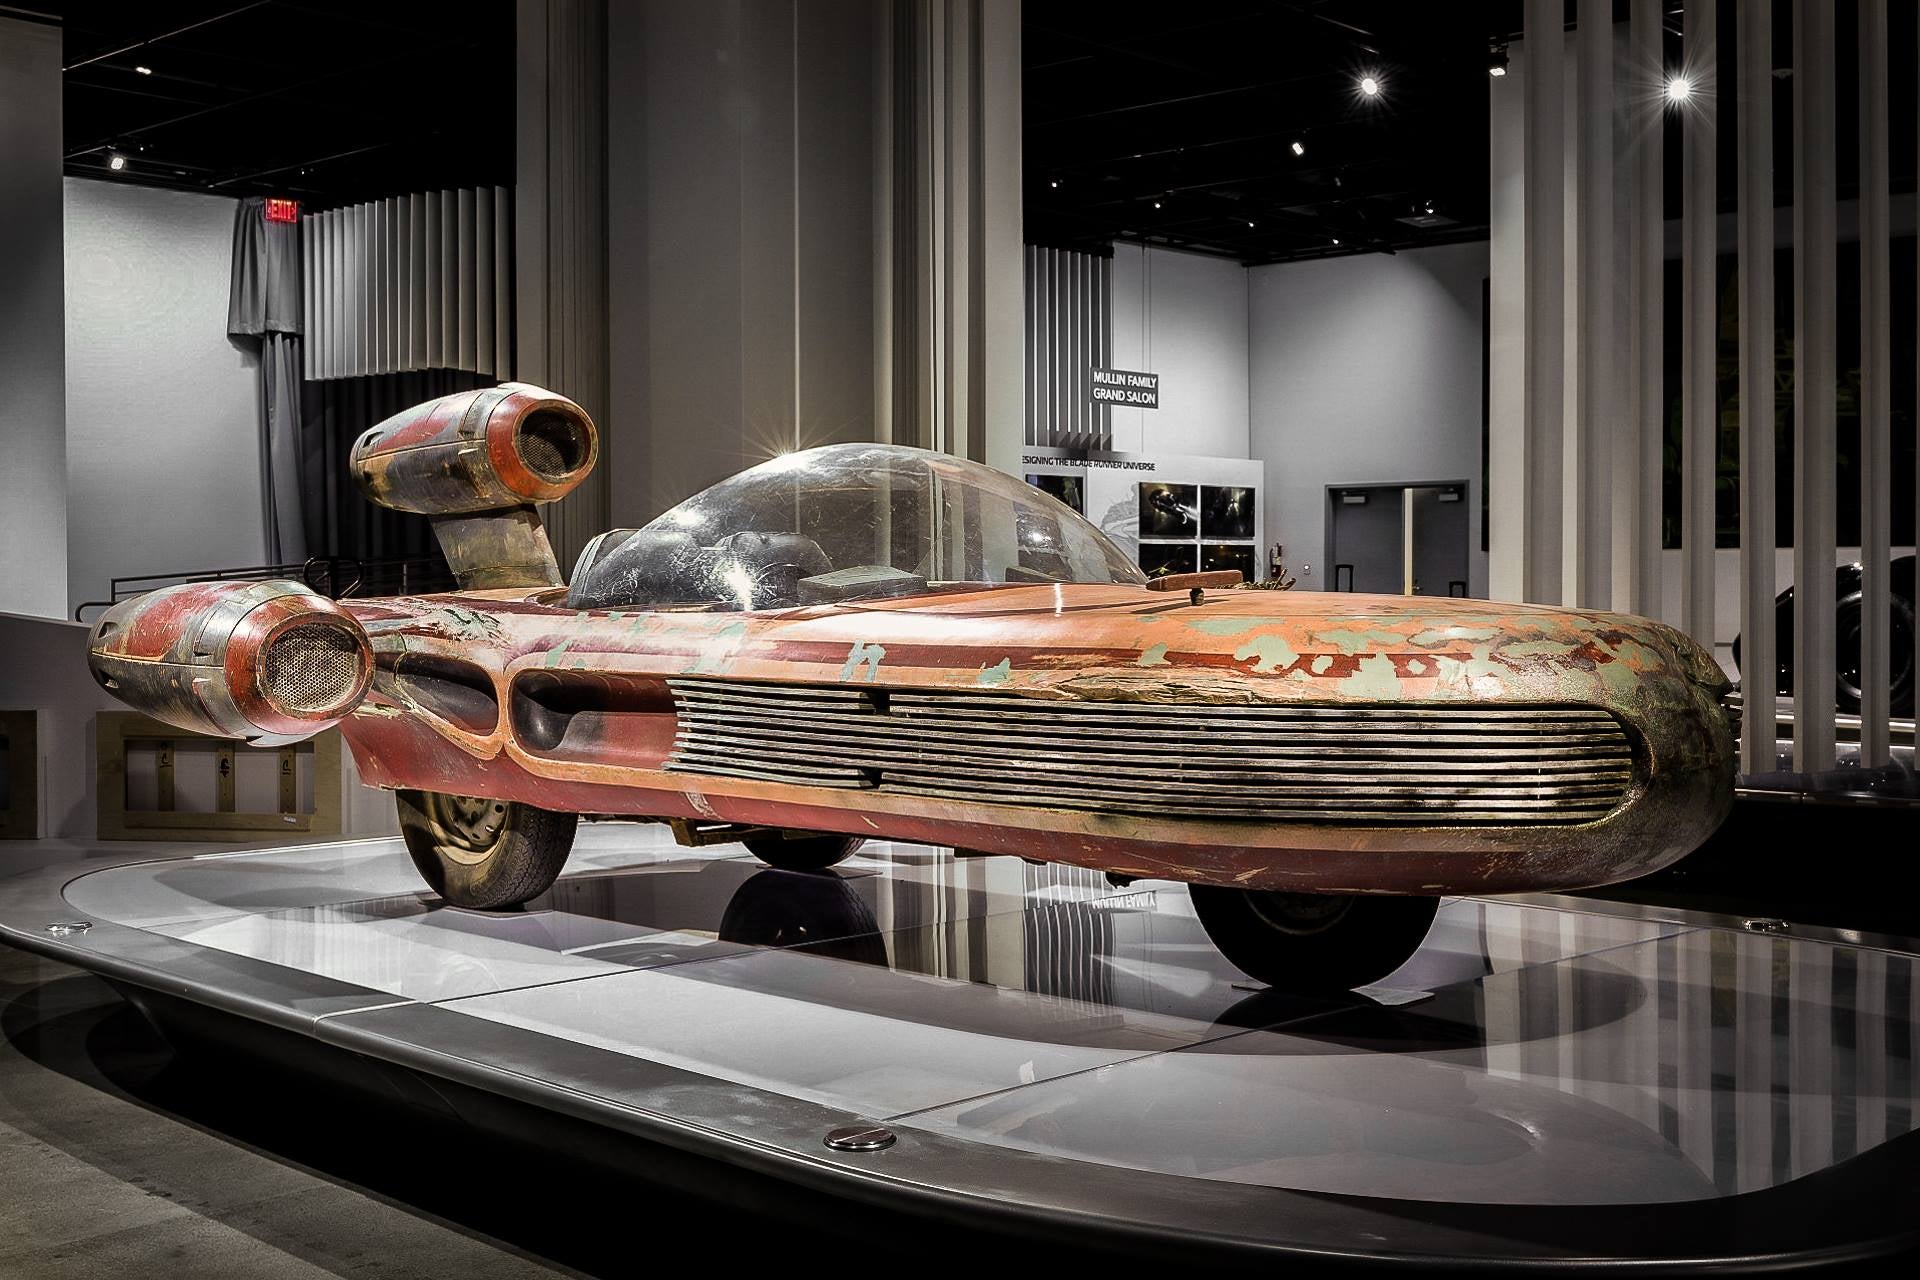 Hollywood Dream Machines at the Petersen Automotive Museum